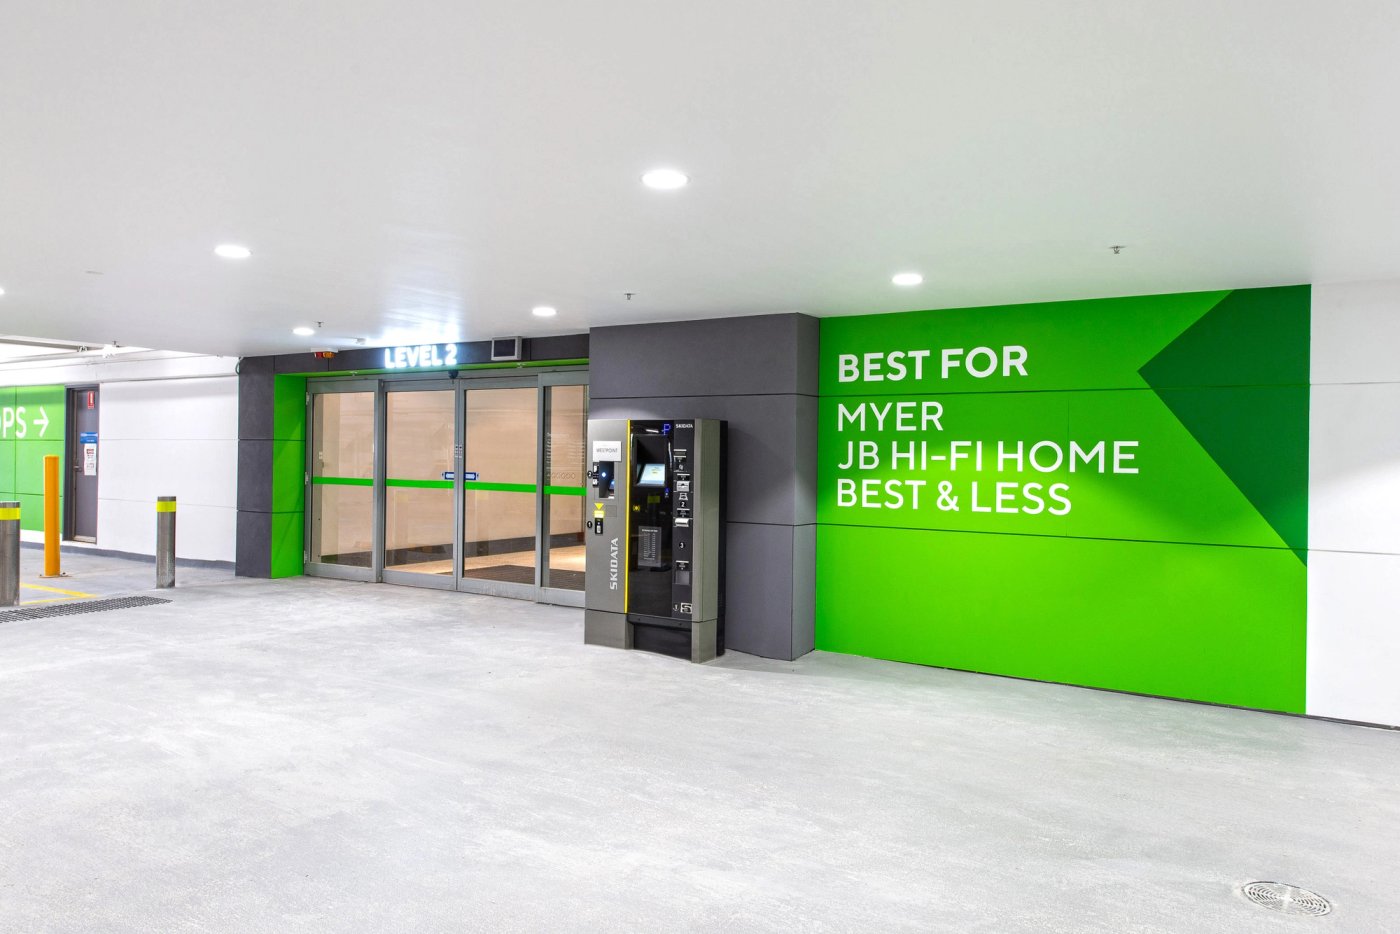 Green threshold entry treatment into shopping centre